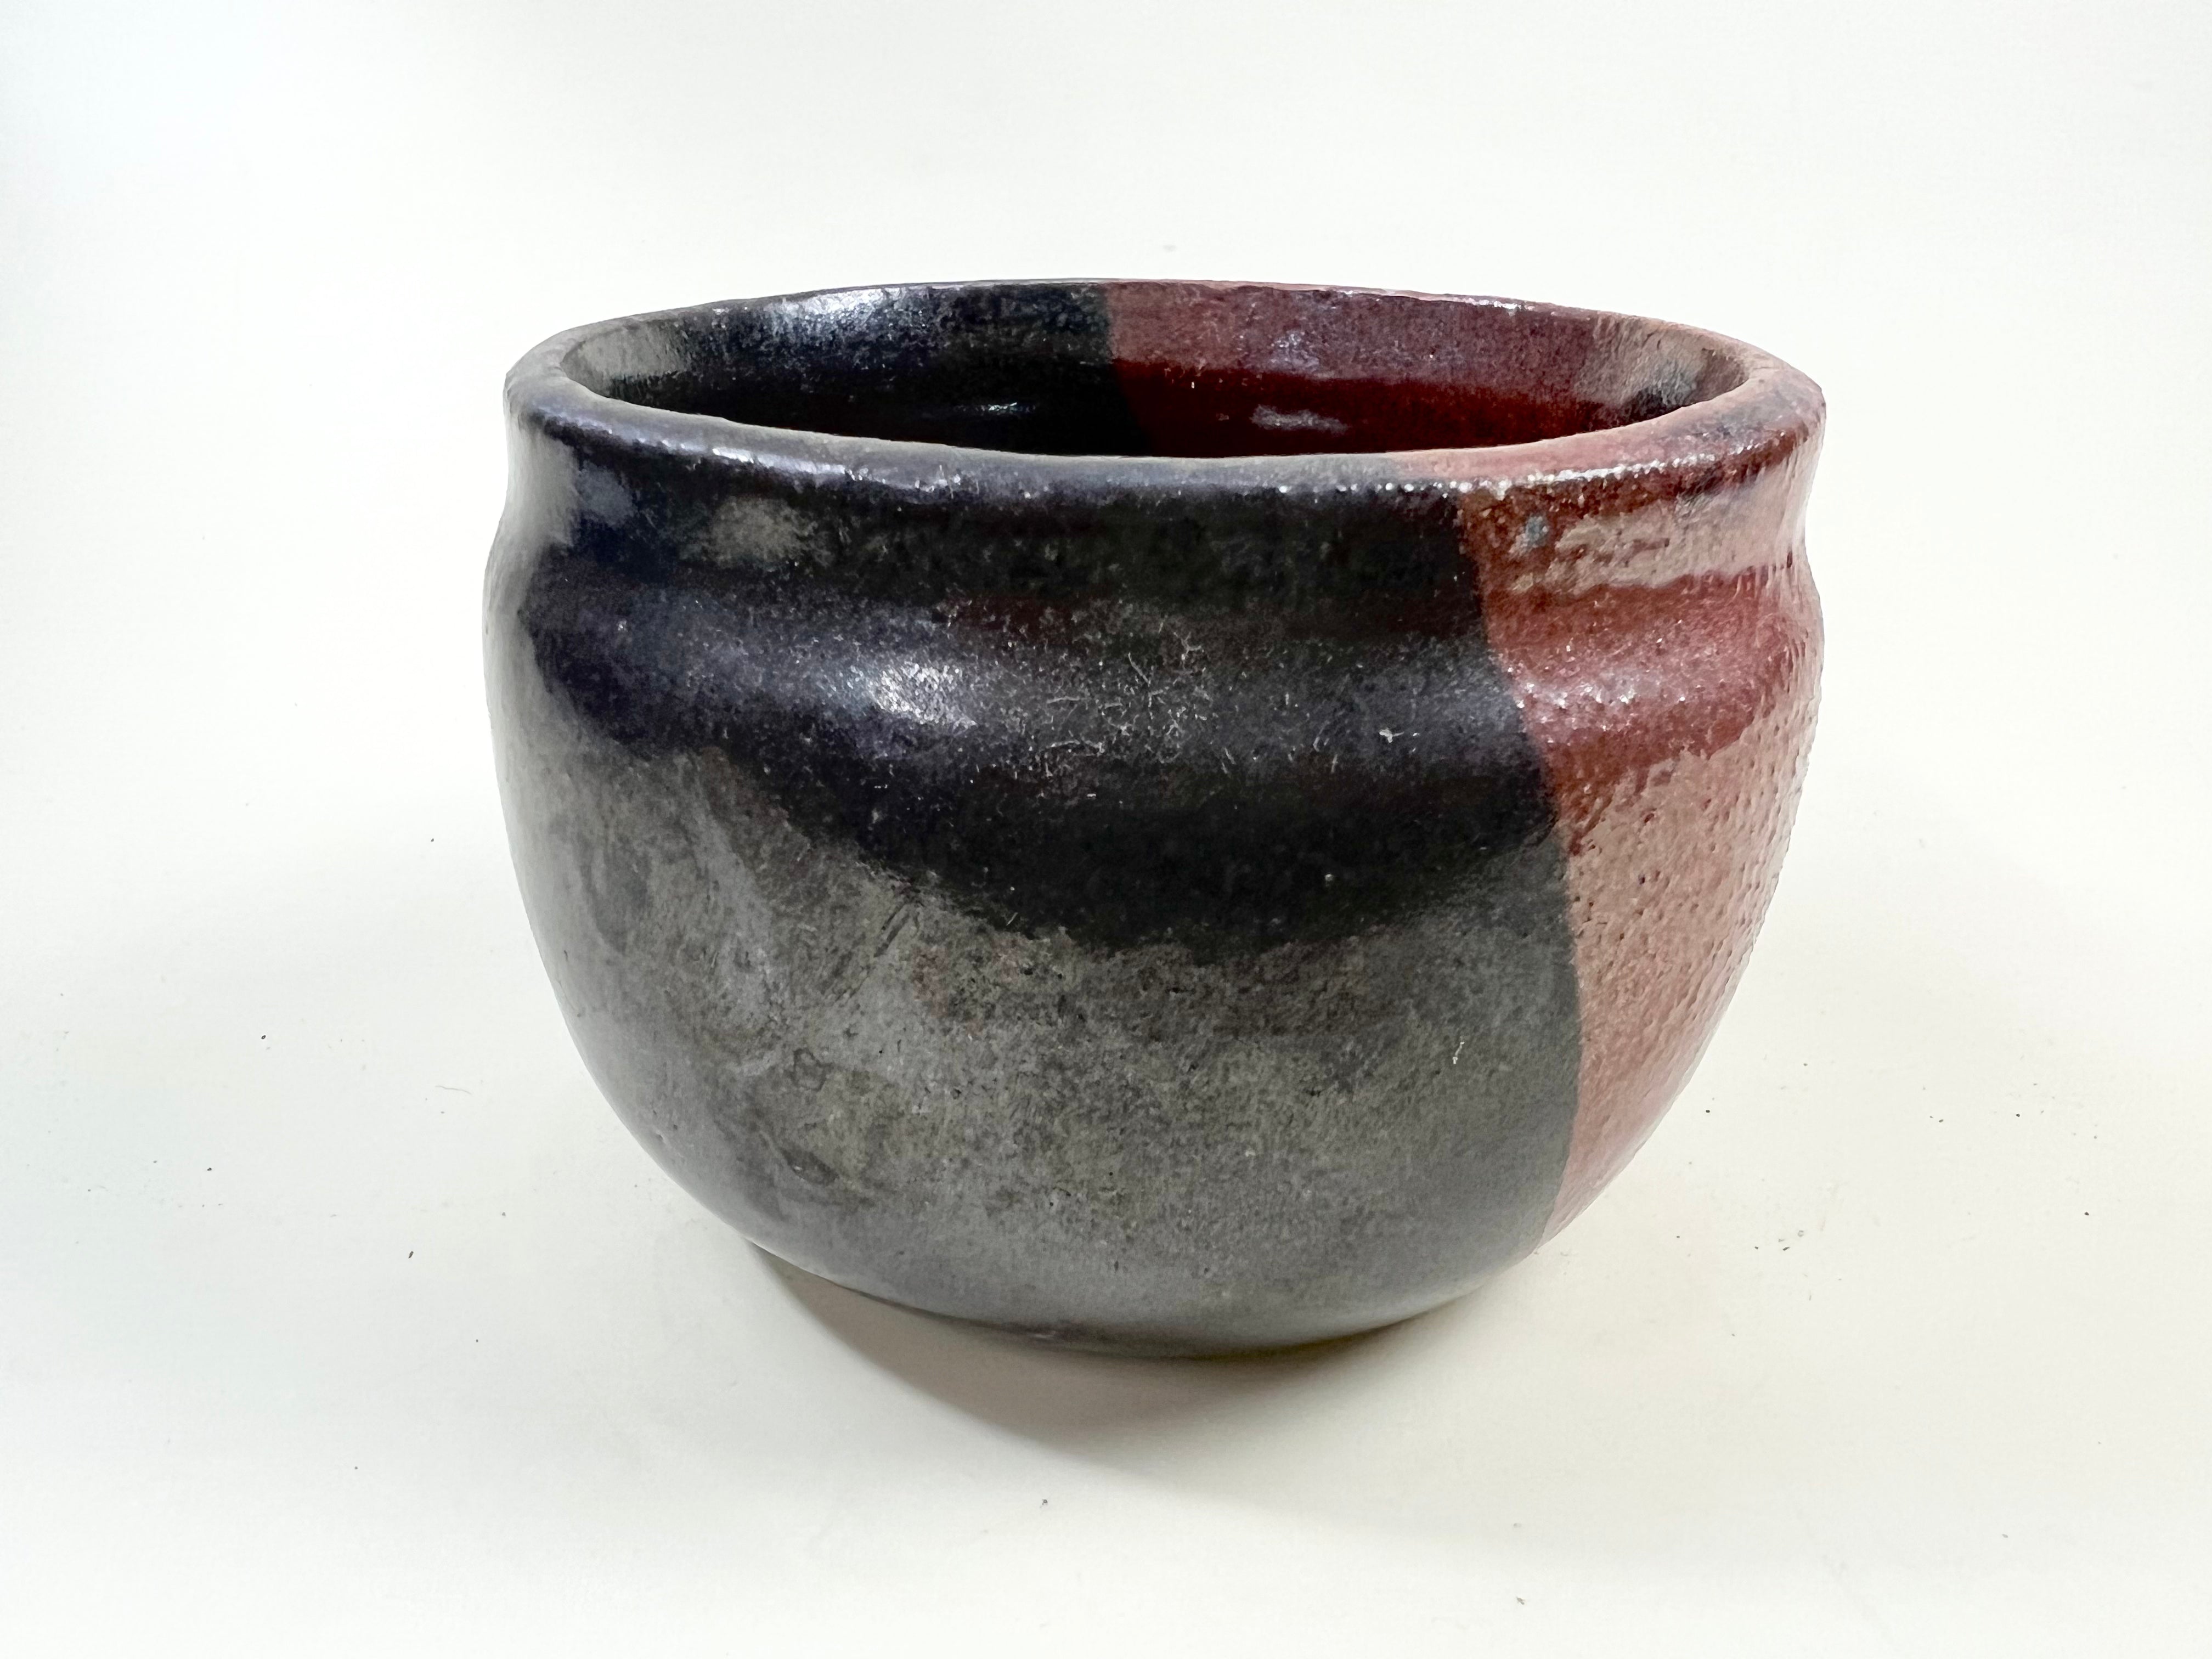 Sienna and Black Glazed Pottery Small Bowl or Planter